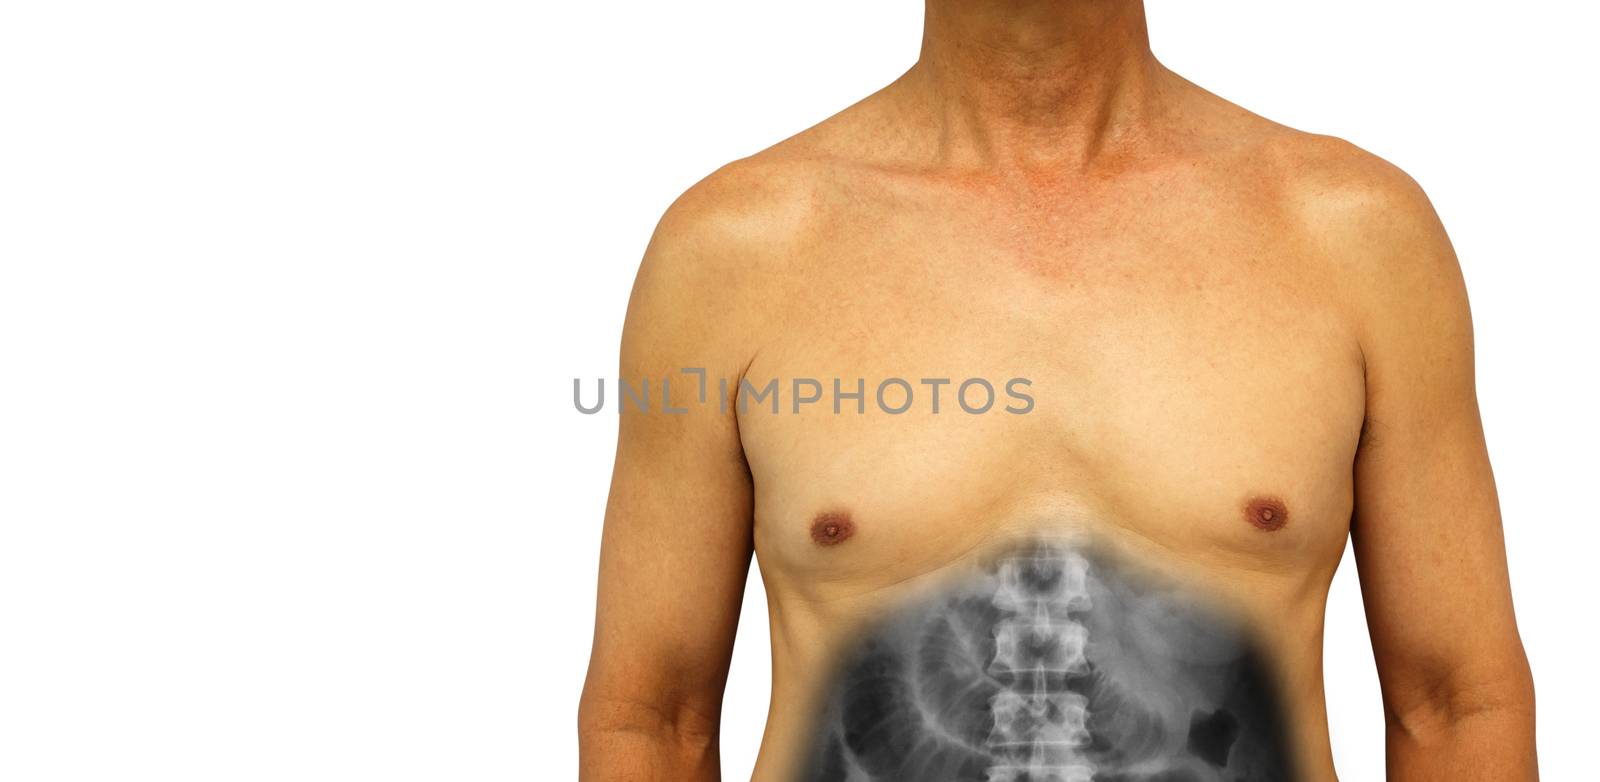 Colon cancer and Small intestine obstruction . Human abdomen with x-ray show small bowel dilated due to obstructed . Isolated background . Blank area at left side by stockdevil